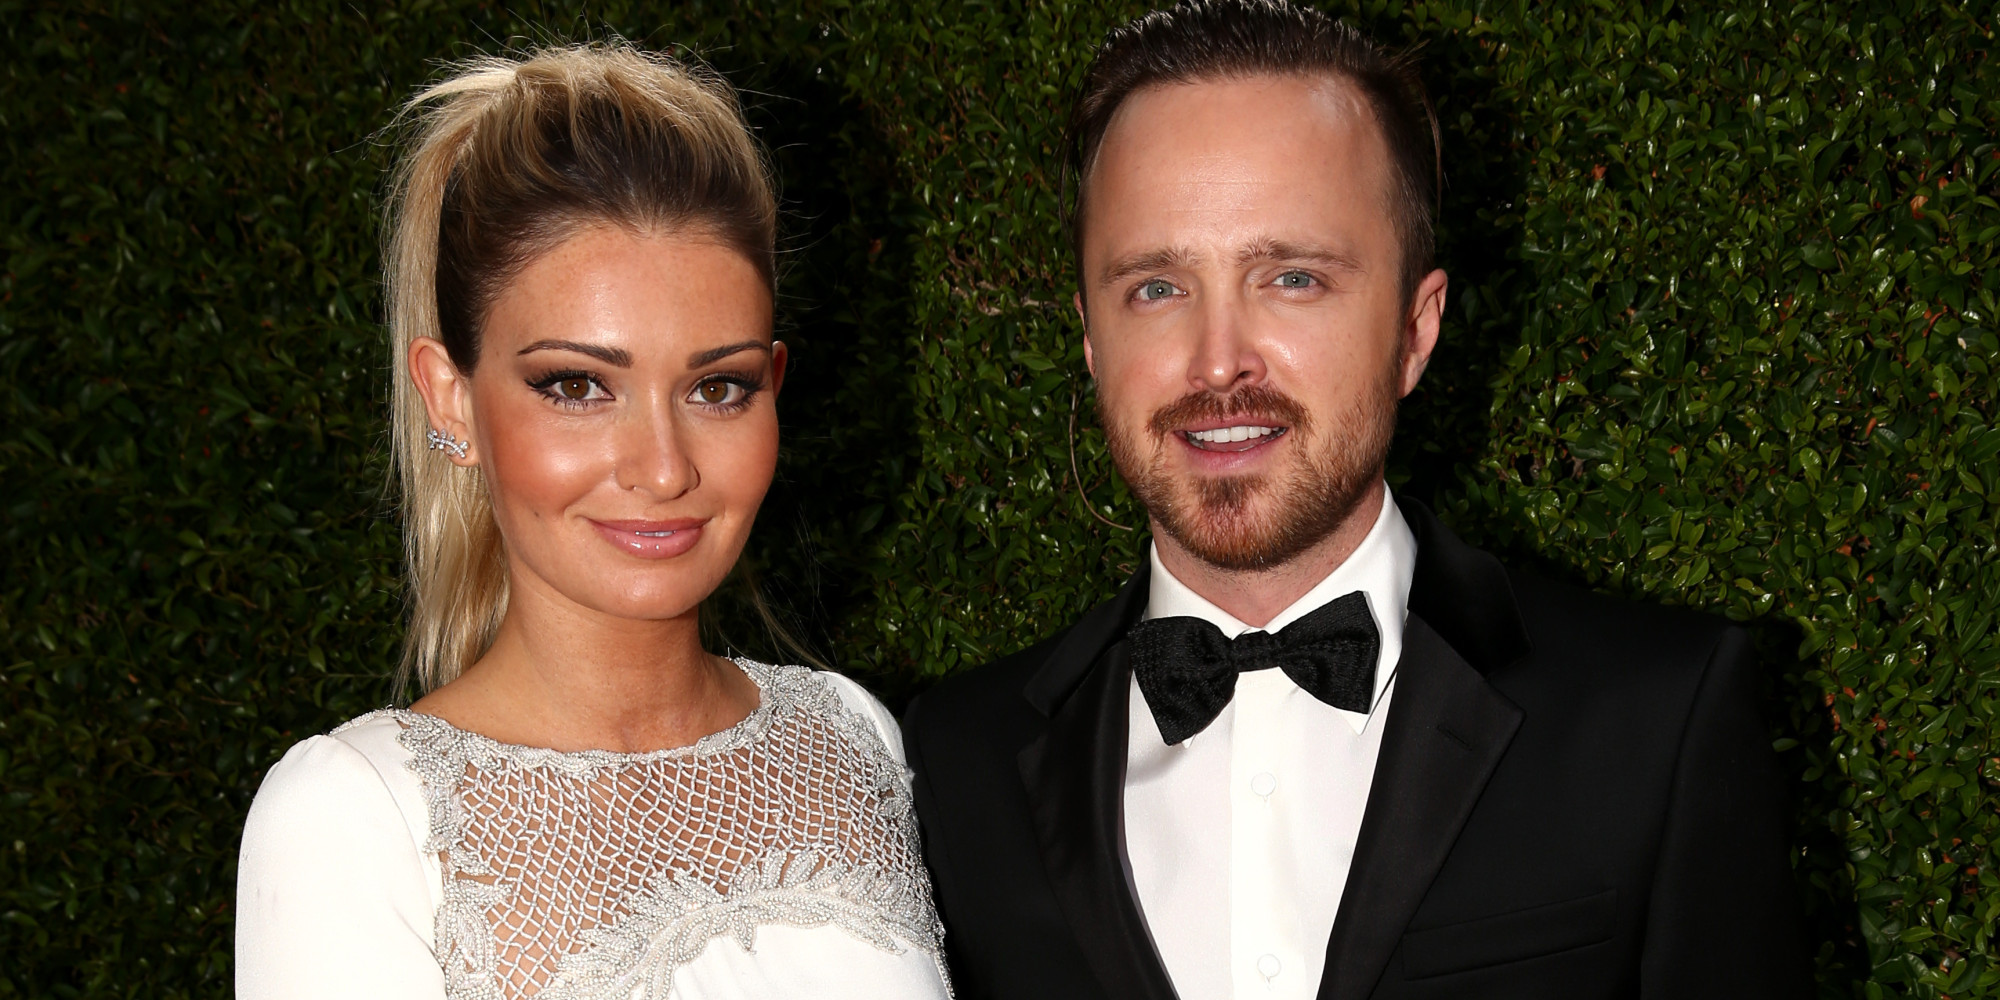 Aaron Paul And Wife Lauren Parsekian Are The Emmys' Cutest Couple